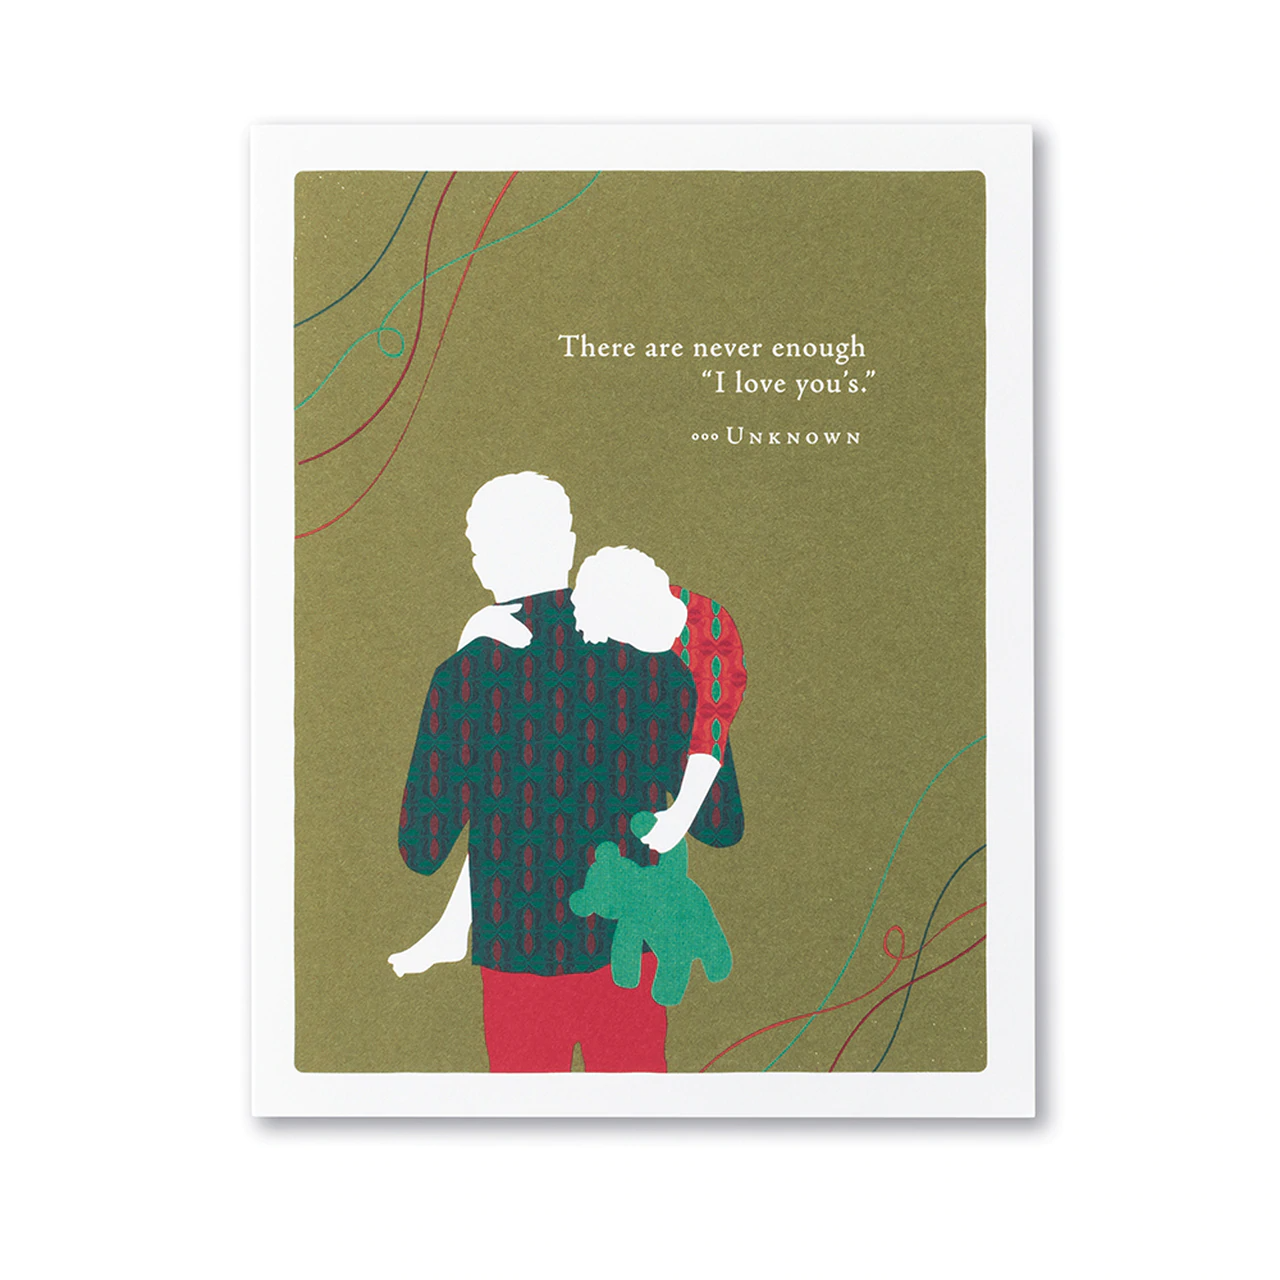 Positively Green Greeting Card - Father's Day - “There are never enough 'I love you's.'” —Unknown - Mellow Monkey